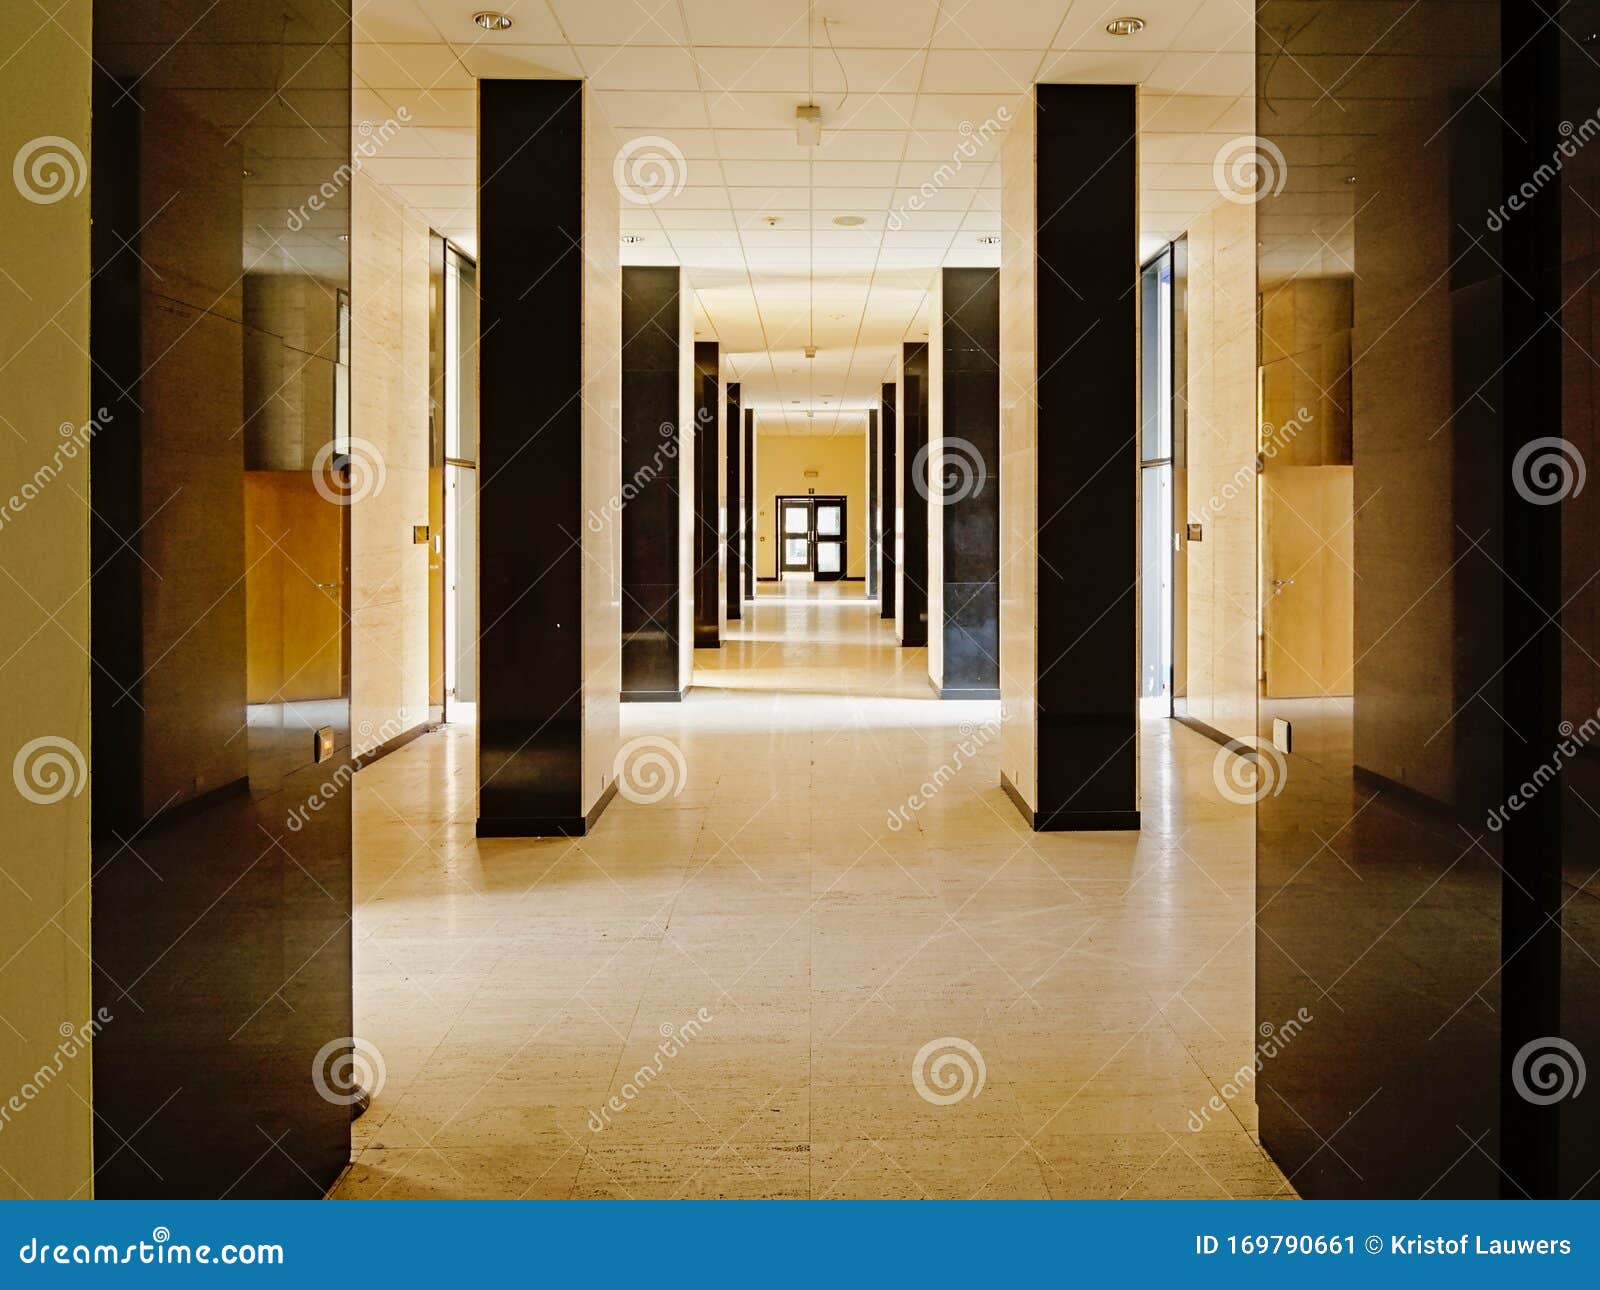 Fancy Hallway of an Office Building, with Pwalls in Marble and Pilars in  Shine Black Granite Editorial Photo - Image of detail, interior: 169790661